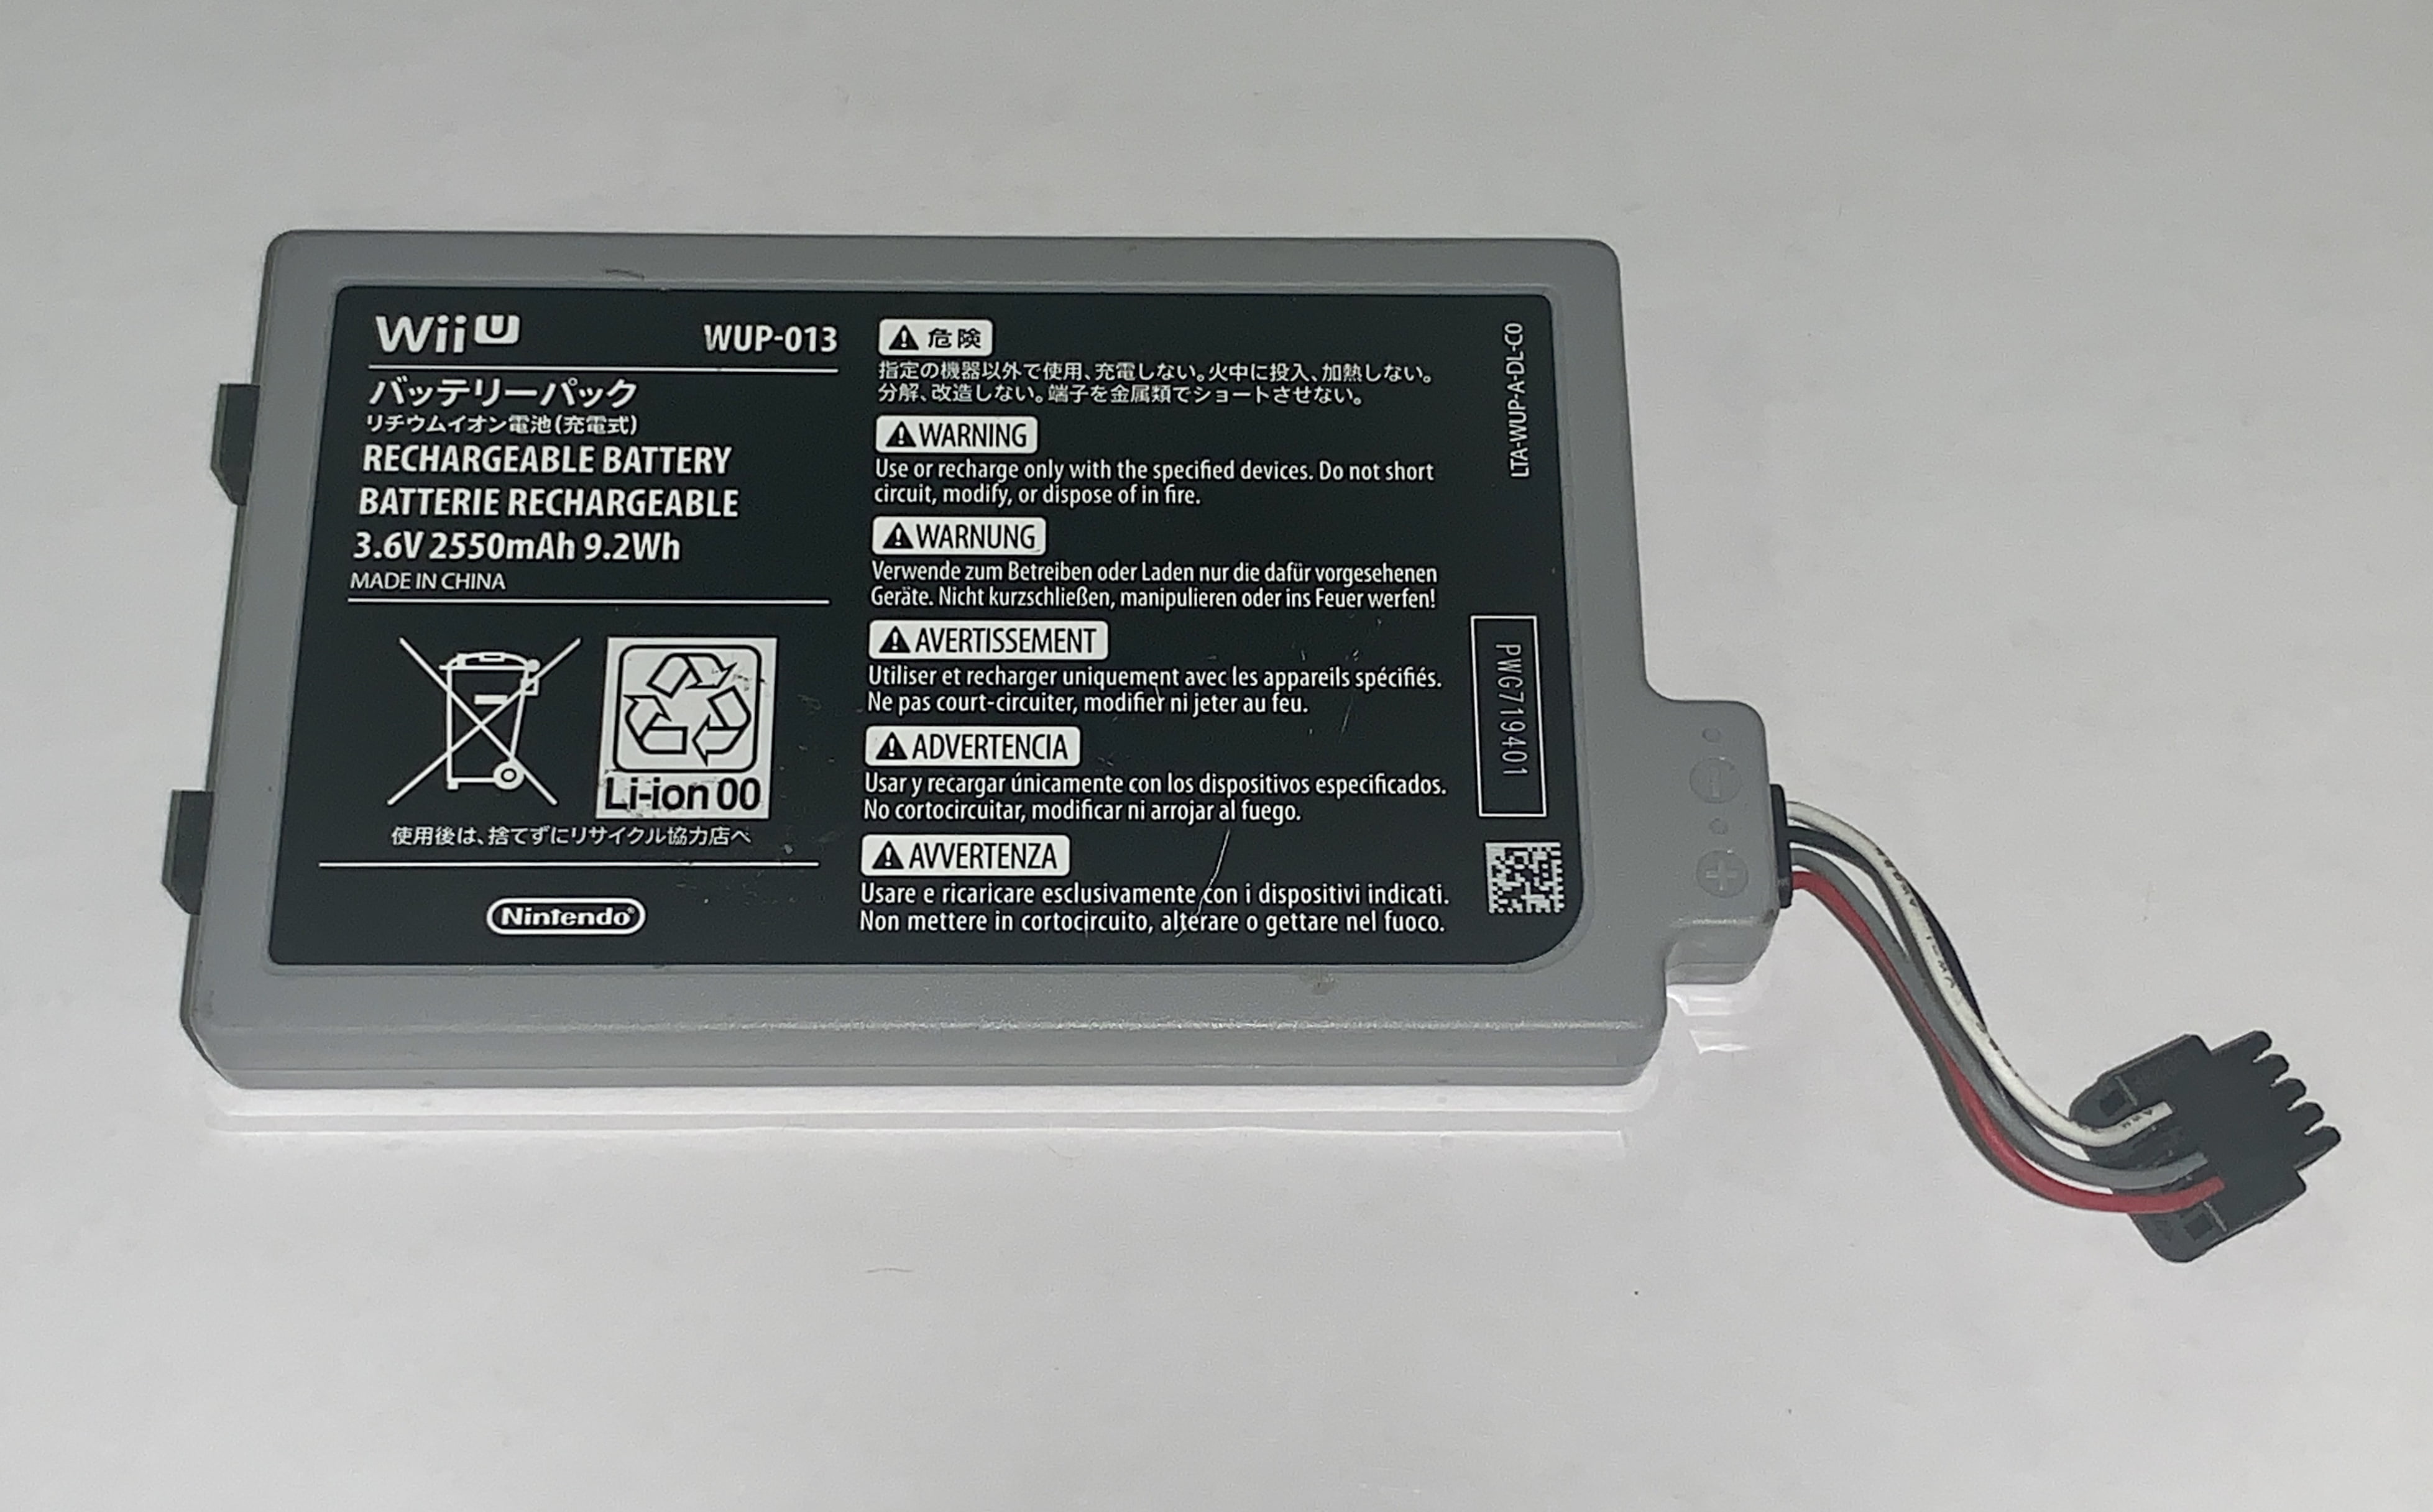 Nintendo WiiU GamePad Replacement Extended Battery (WUP-013) 3.6V 2550mAh